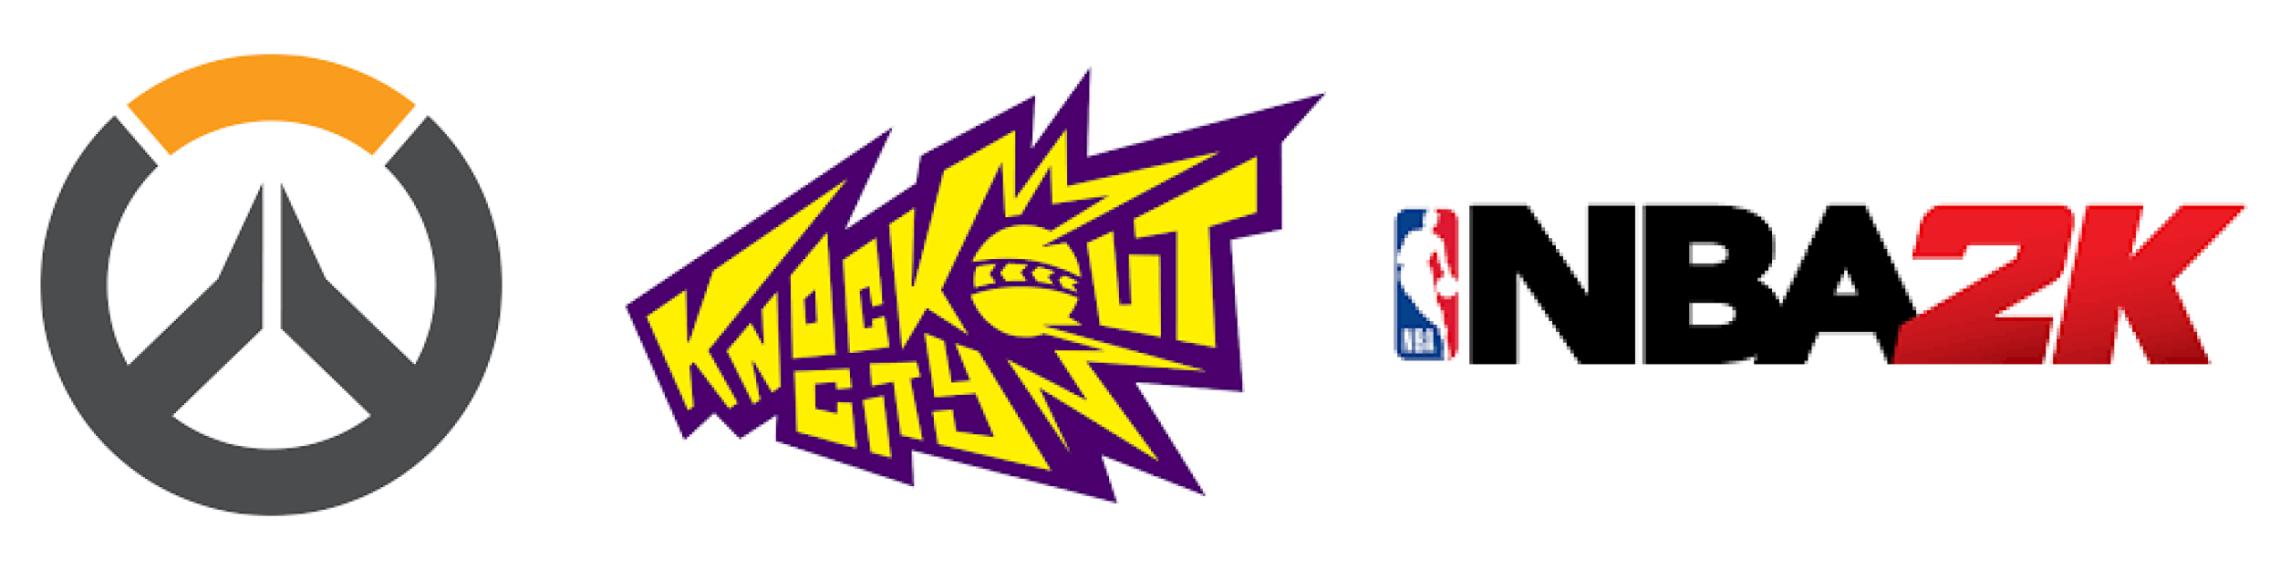 Video game logos - Overwatch, Knockout City, and NBA 2K